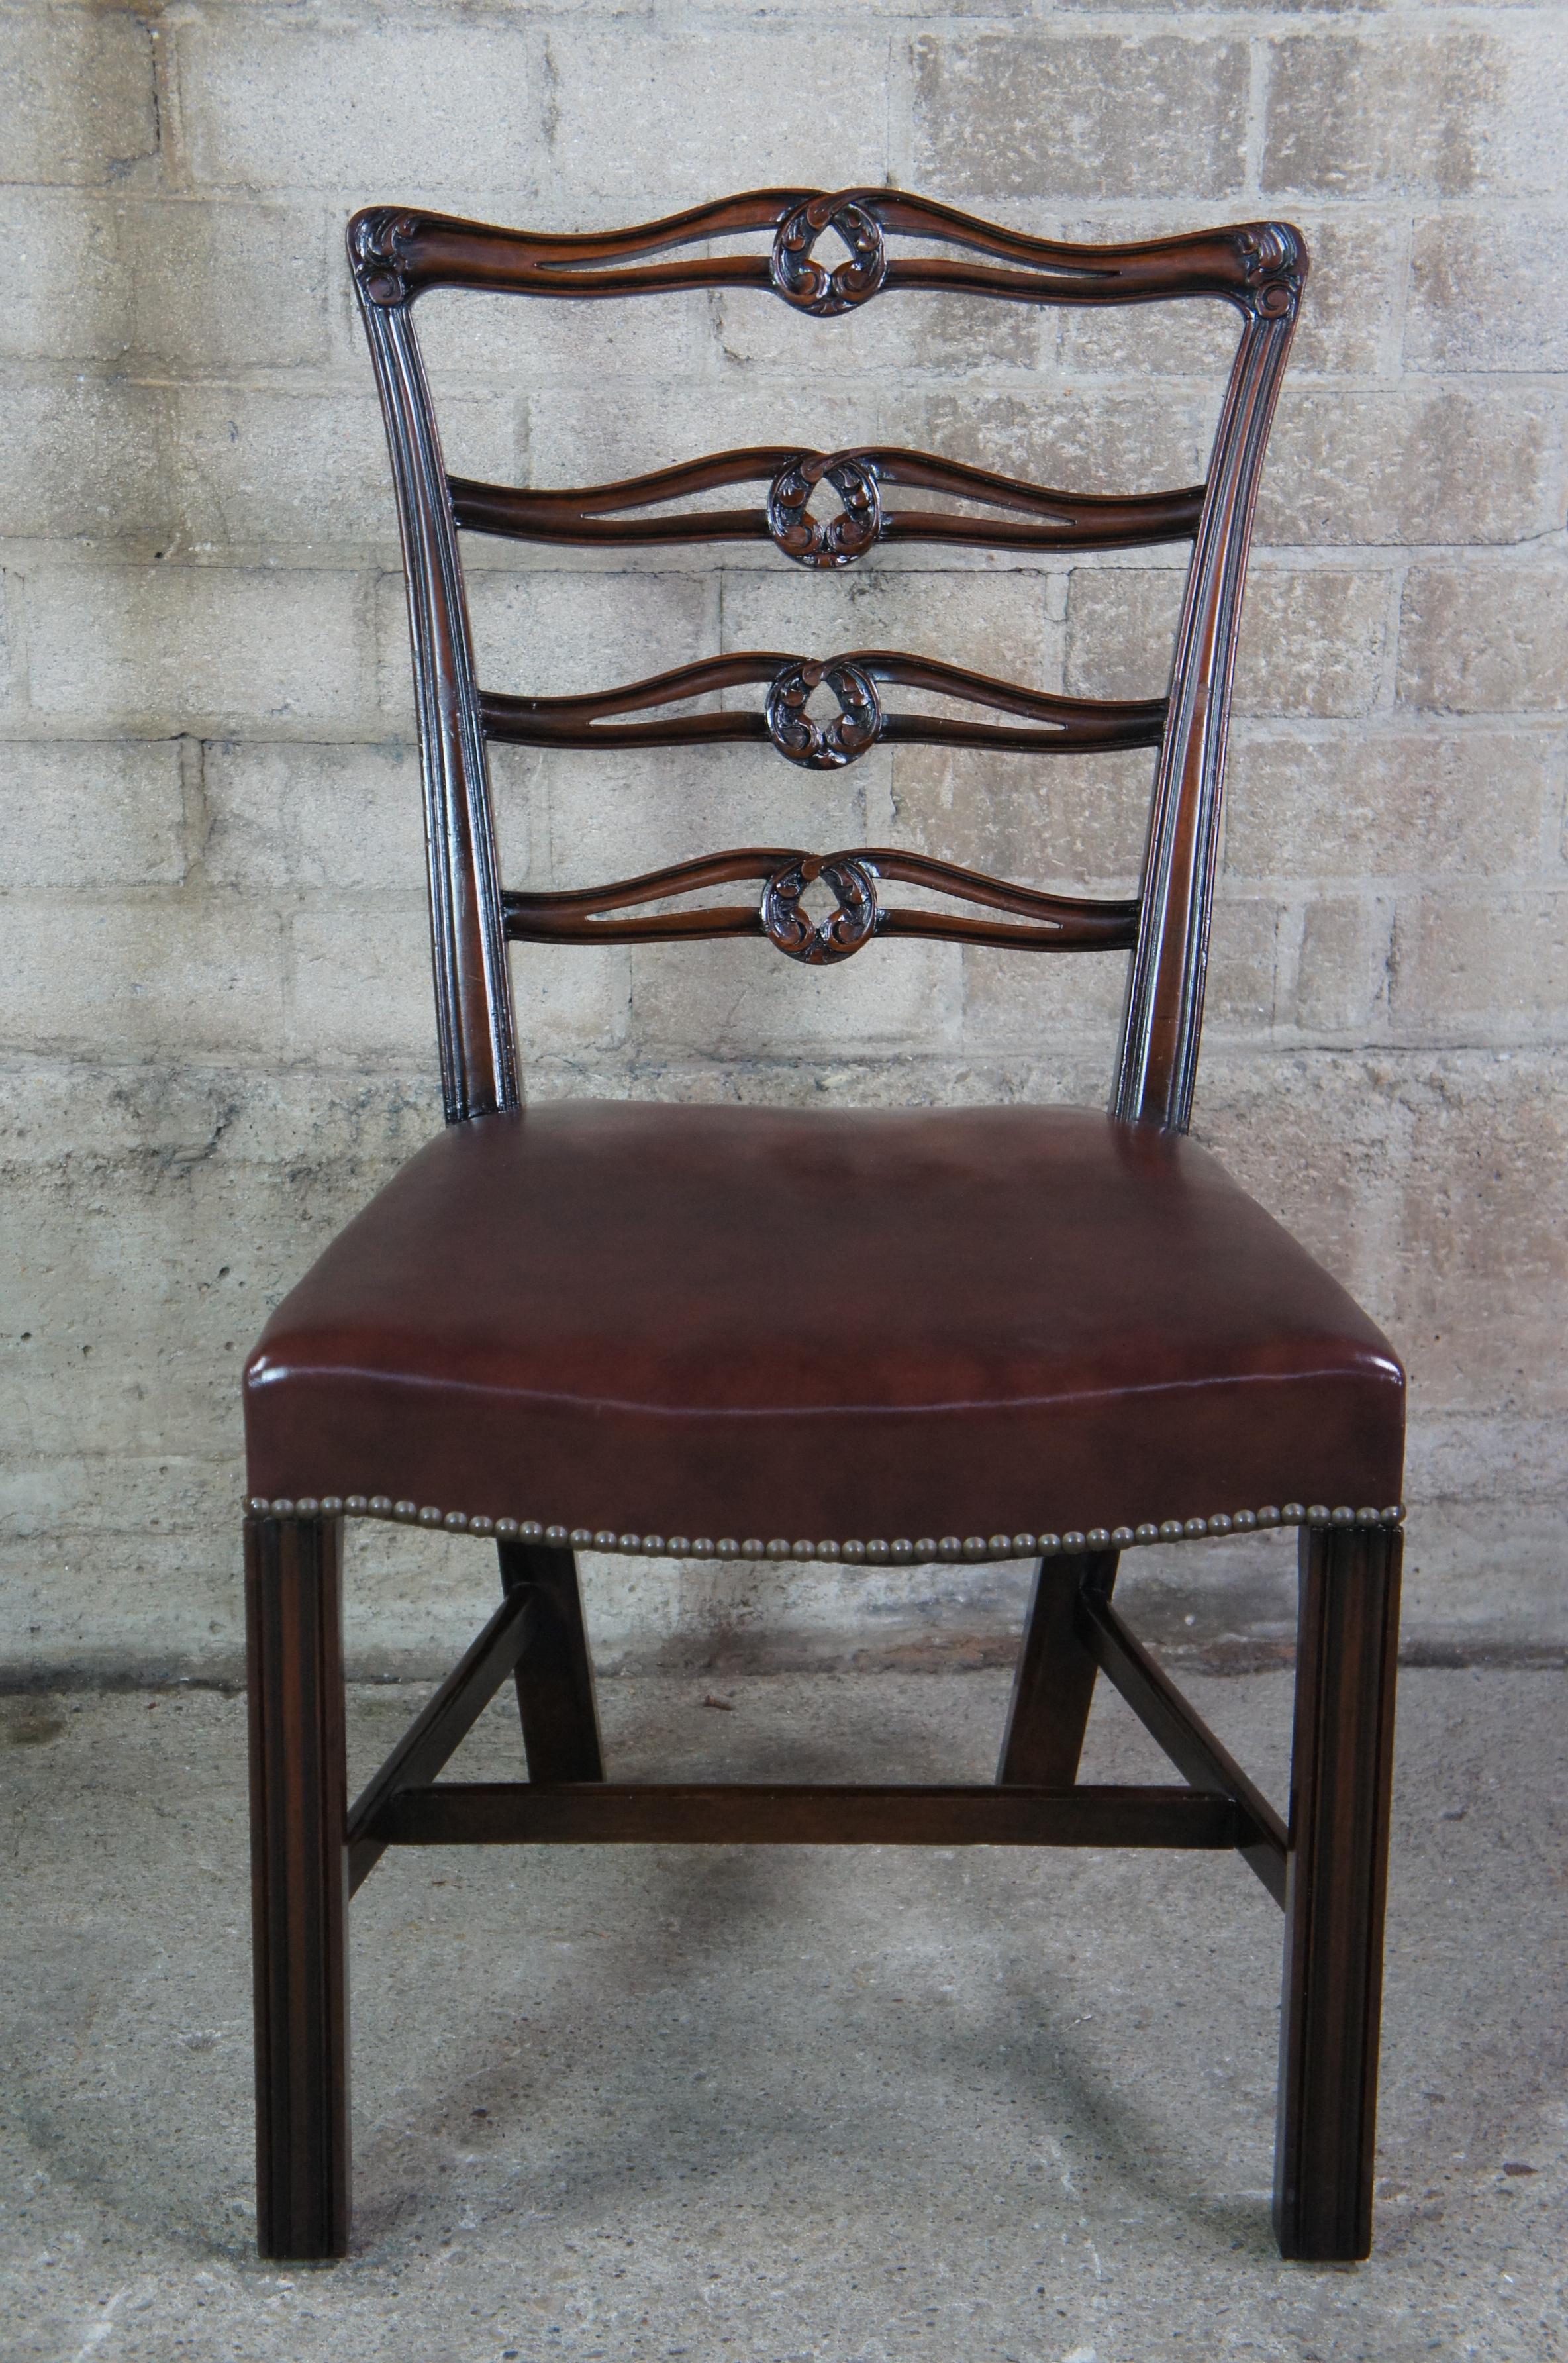 6 Antique Chippendale Carved Mahogany Ladder Ribbon Back Leather Dining Chairs 5